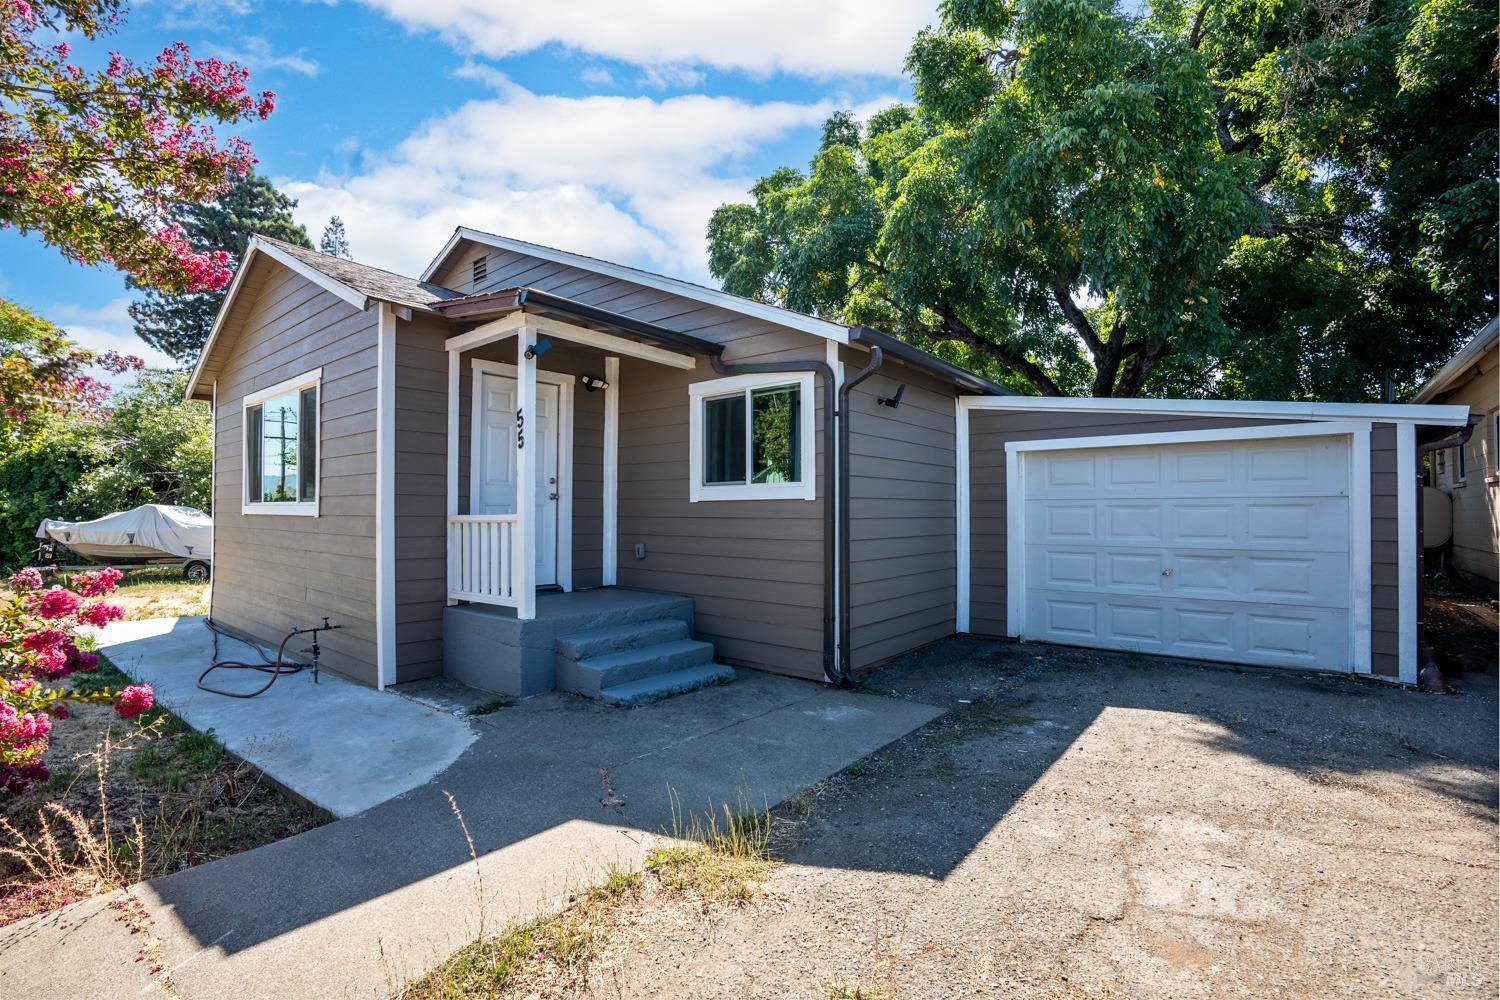 Photo of 55 E St in Lakeport, CA